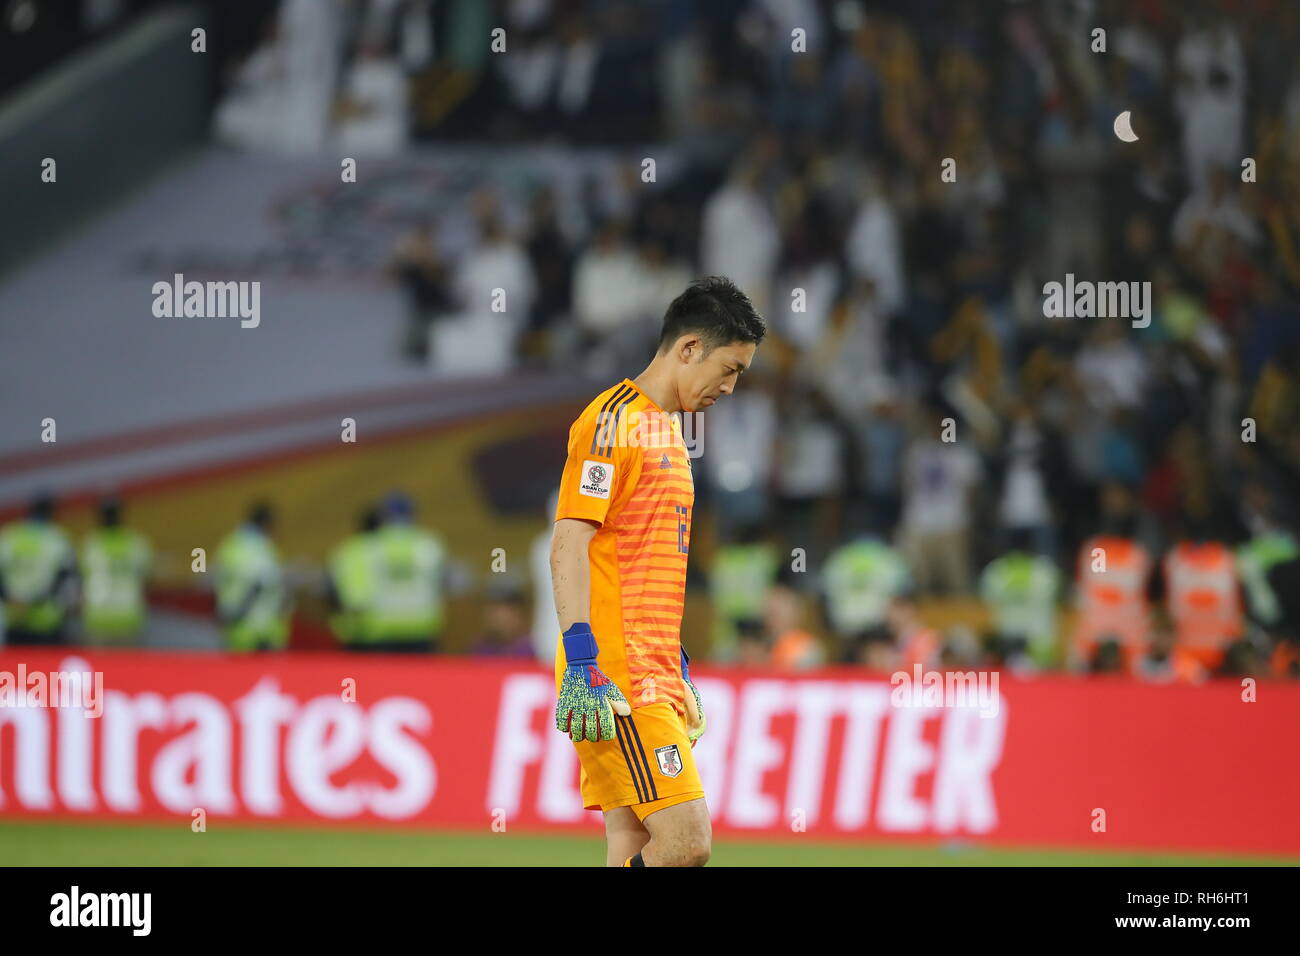 Abu Dhabi, United Arab Emirates (UAE). 1st Feb, 2019. Shuichi Gonda of Japan reacts during the final match between Japan and Qatar at the 2019 AFC Asian Cup in Abu Dhabi, the United Arab Emirates (UAE), Feb. 1, 2019. Credit: Ding Xu/Xinhua/Alamy Live News Stock Photo